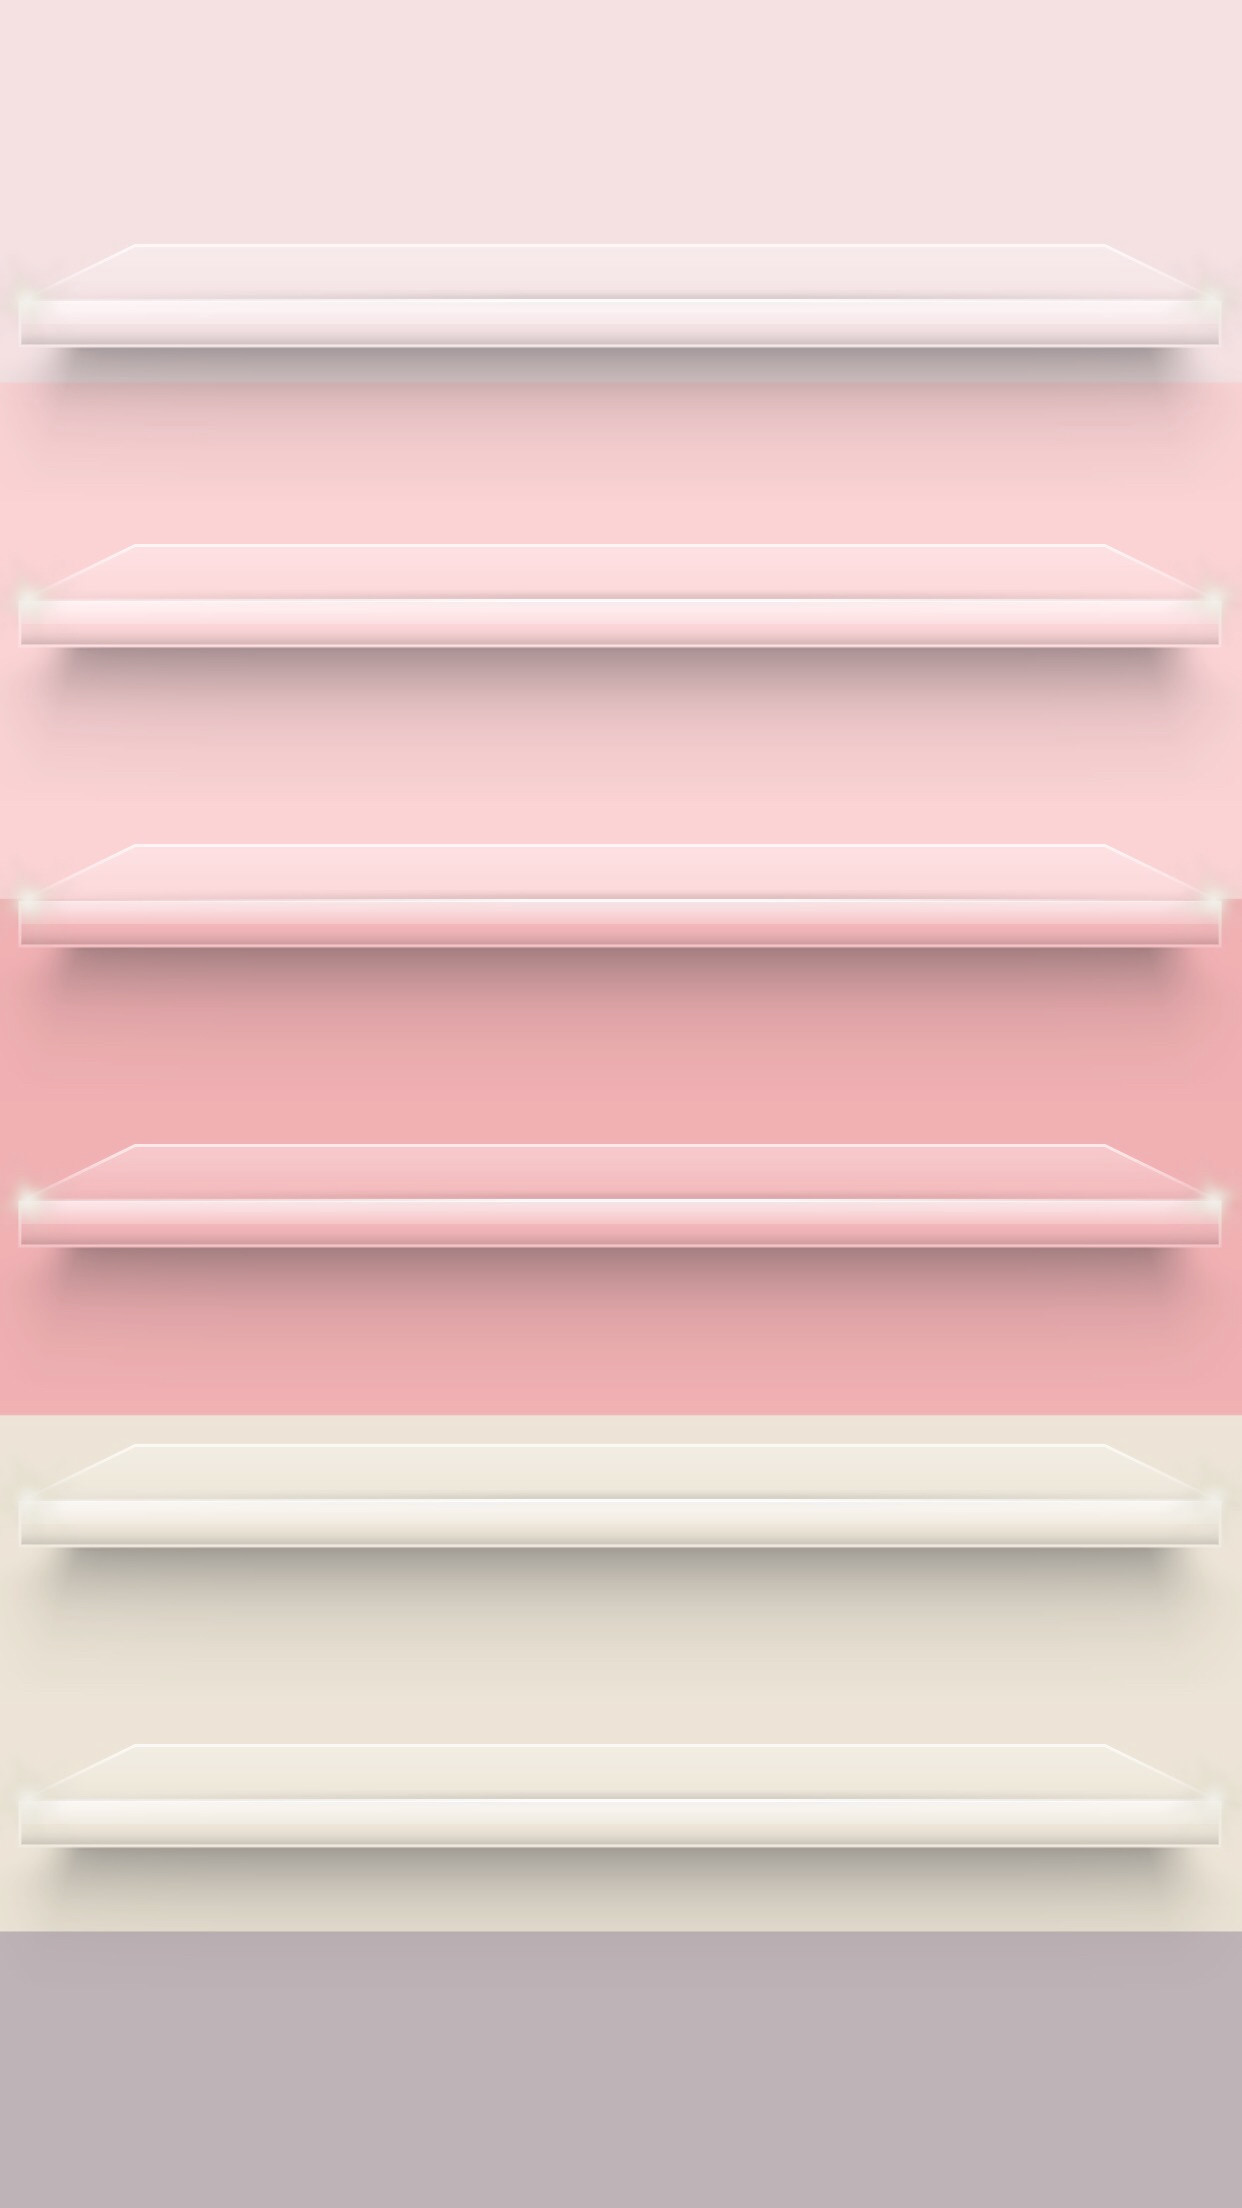 Striped Home Screen - Iphone Backgrounds Home Screen - HD Wallpaper 